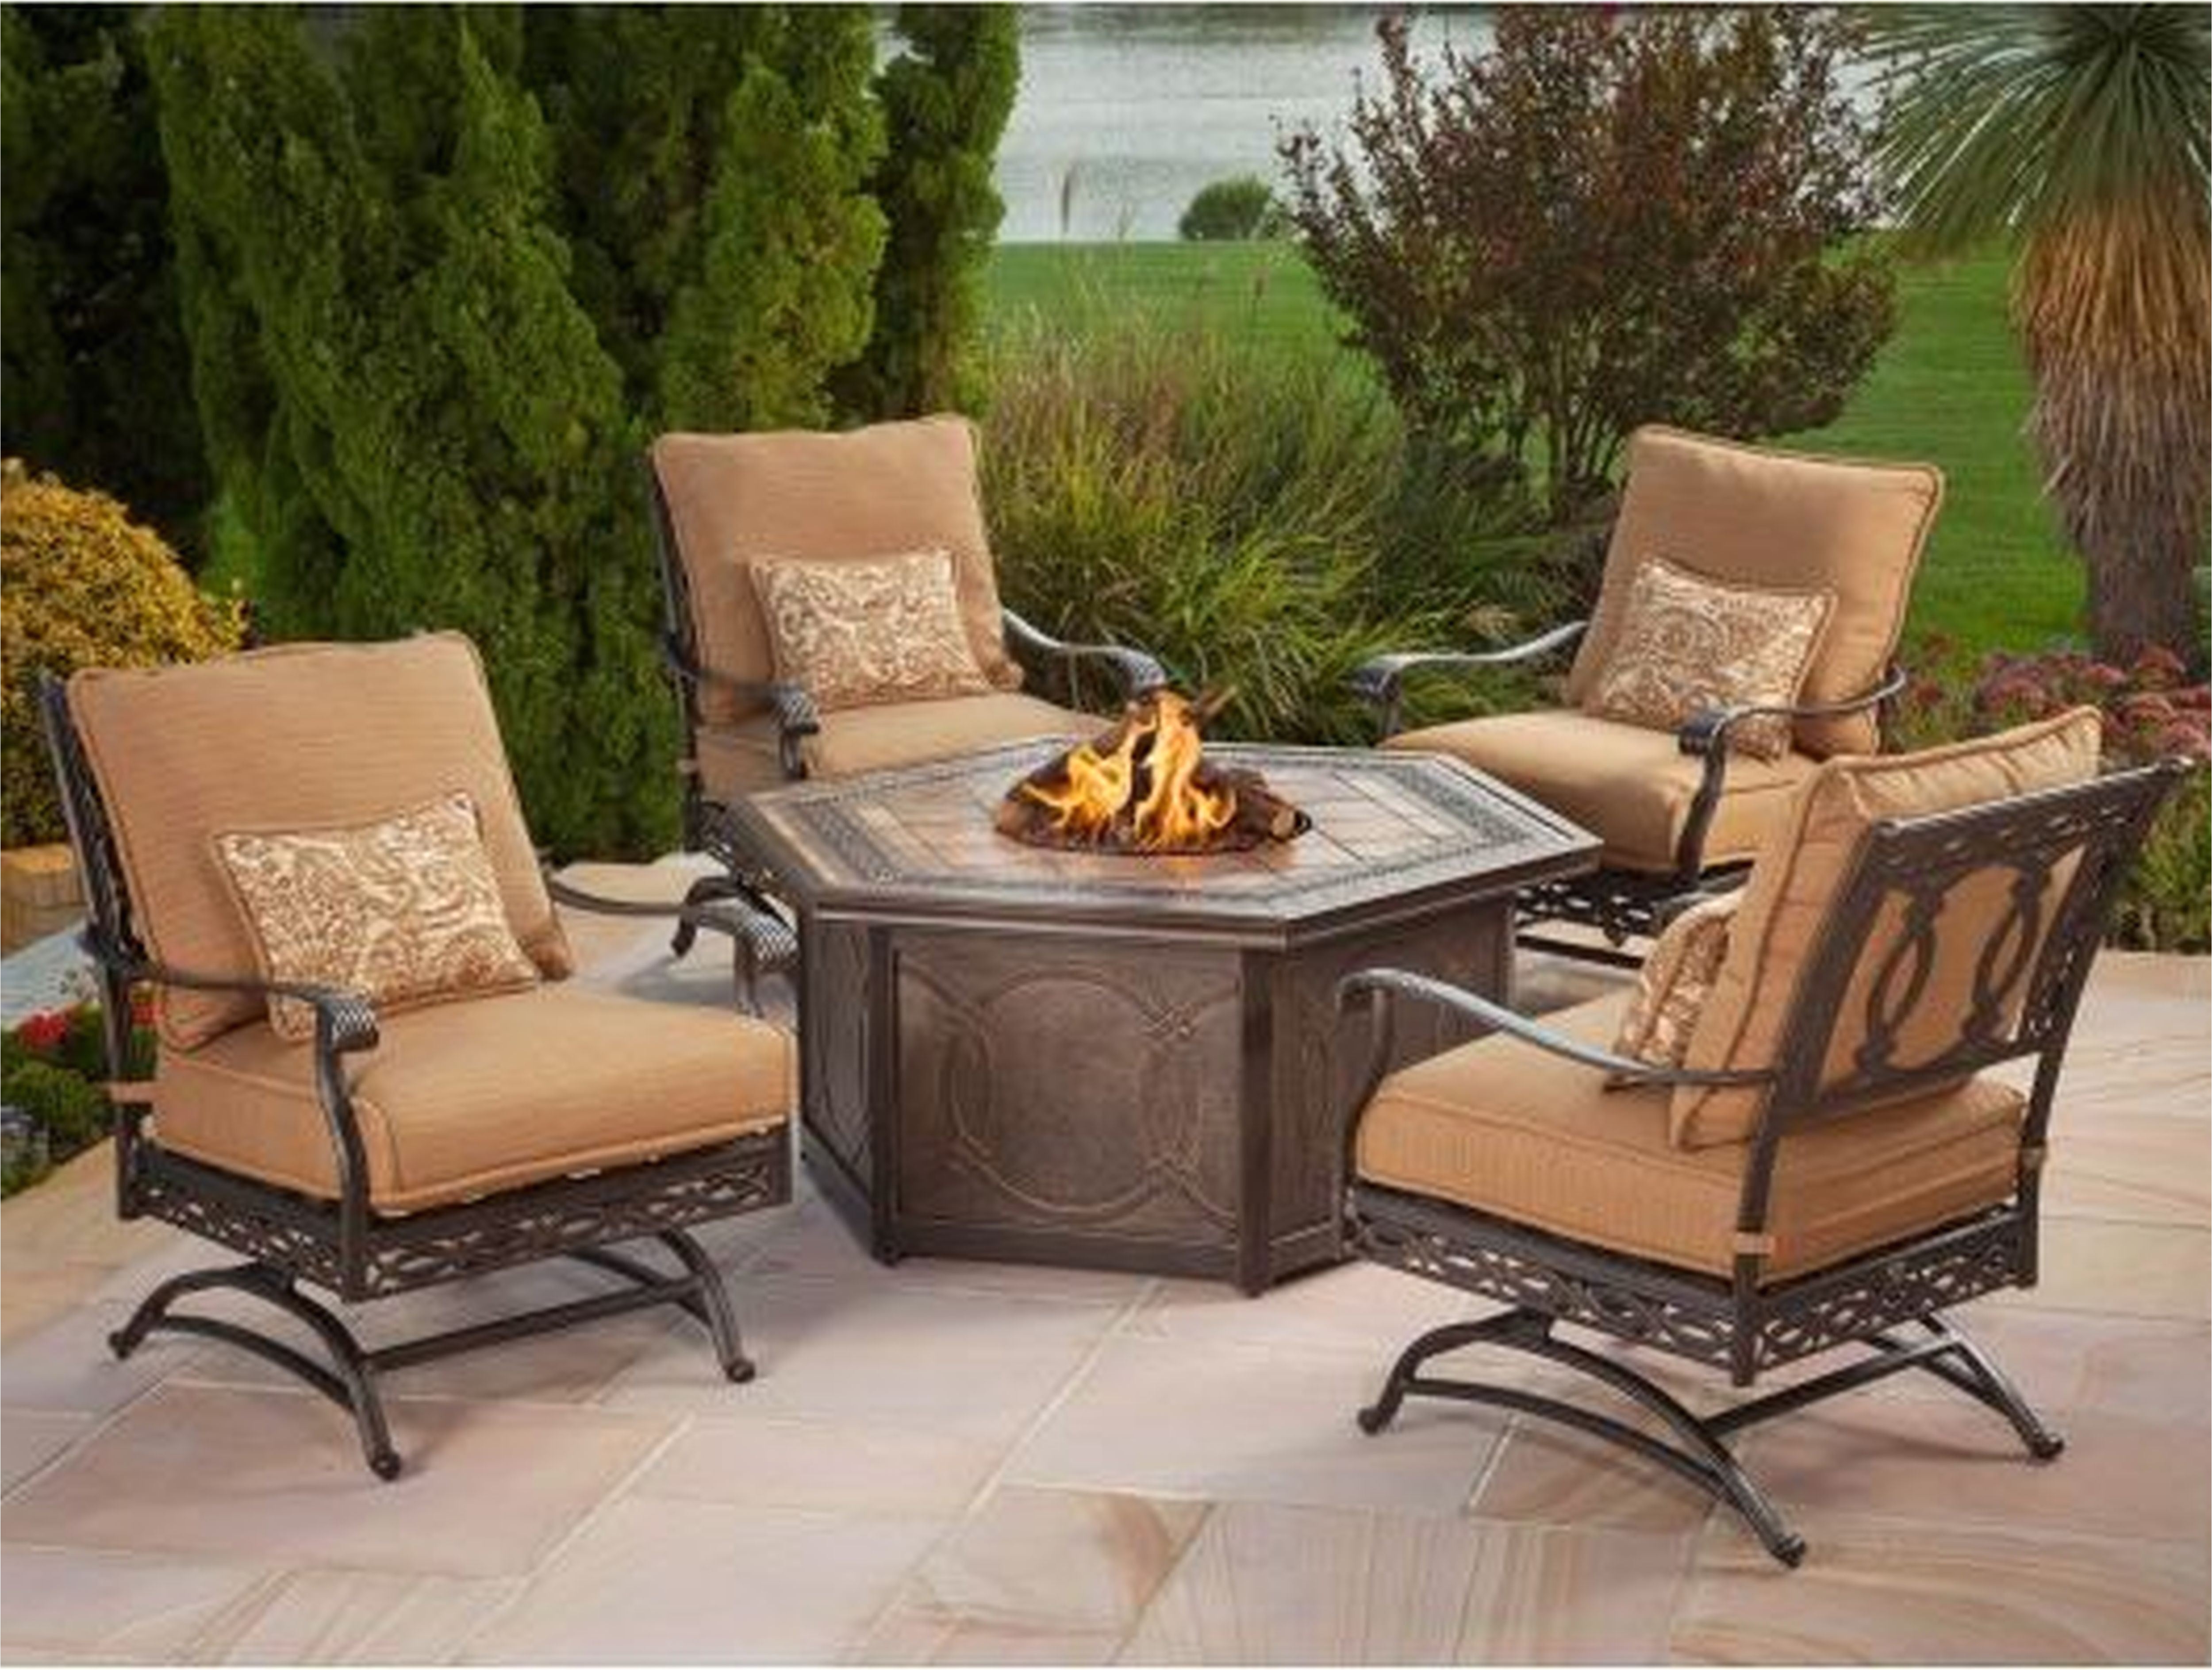 Lowes Outside Table and Chairs Glamorous Outdoor Patio Sets Clearance 20 Dining Fresh Marvelous